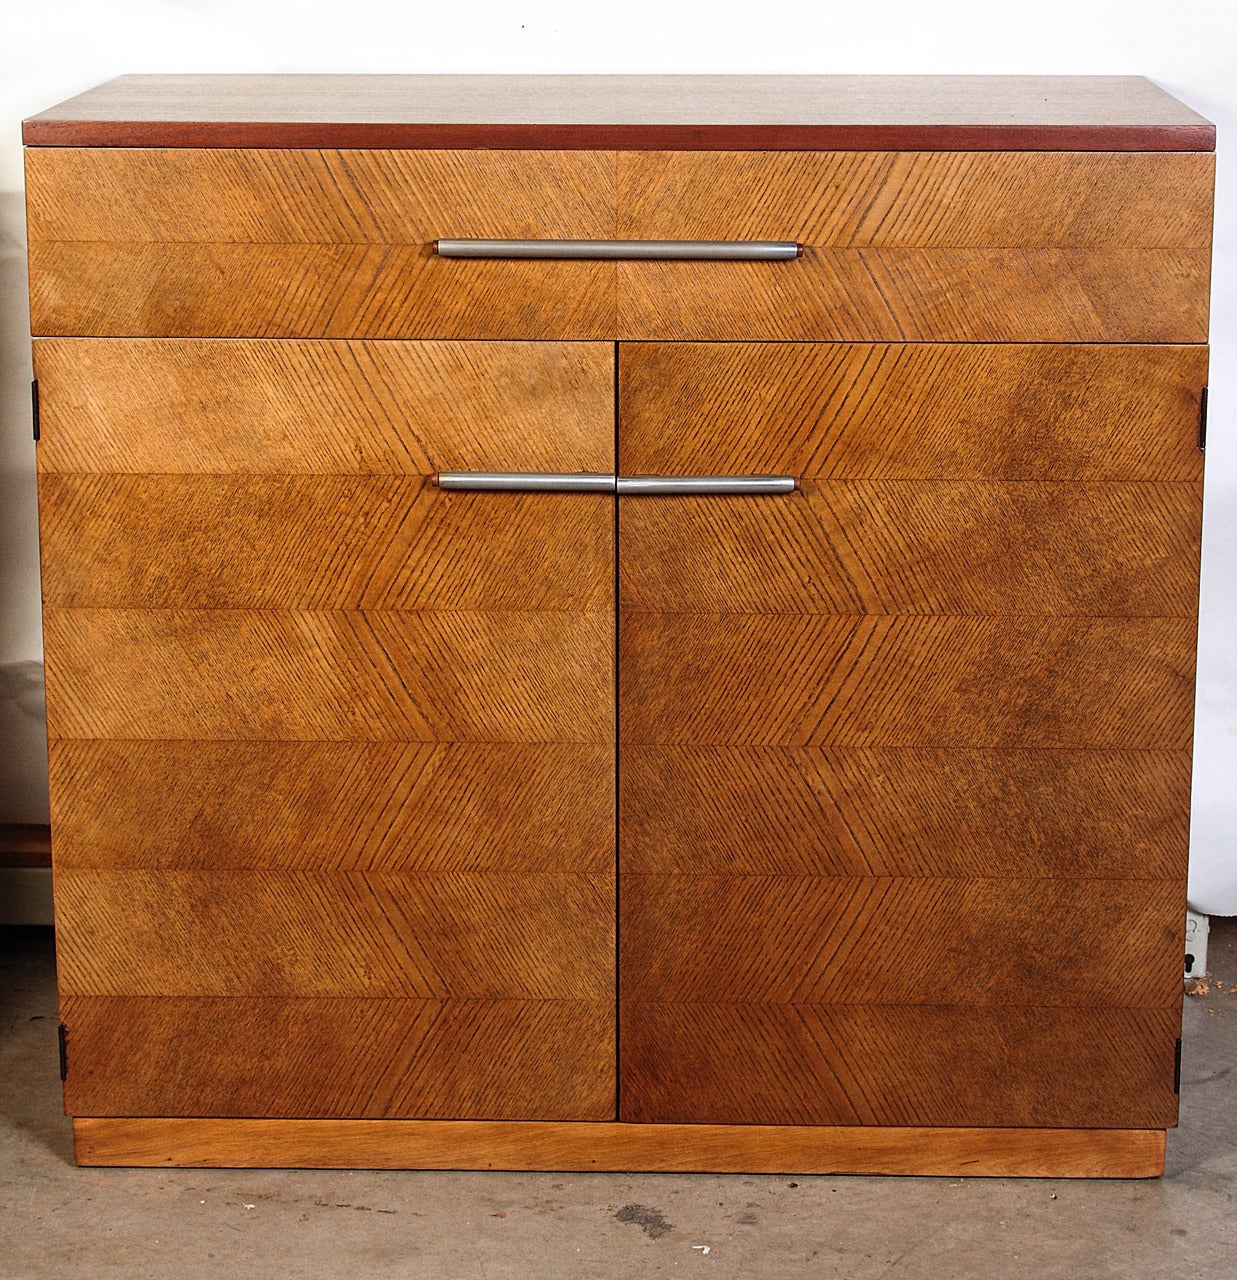 Gilbert Rohde Herman Miller Art Deco 1933 world's fair dressers matched pair

Classic original Rohde century of progress designs, including brushed-pulls with lacquered-wood pull-tips.
Contrasting grain effect.
Very good condition.

Matching